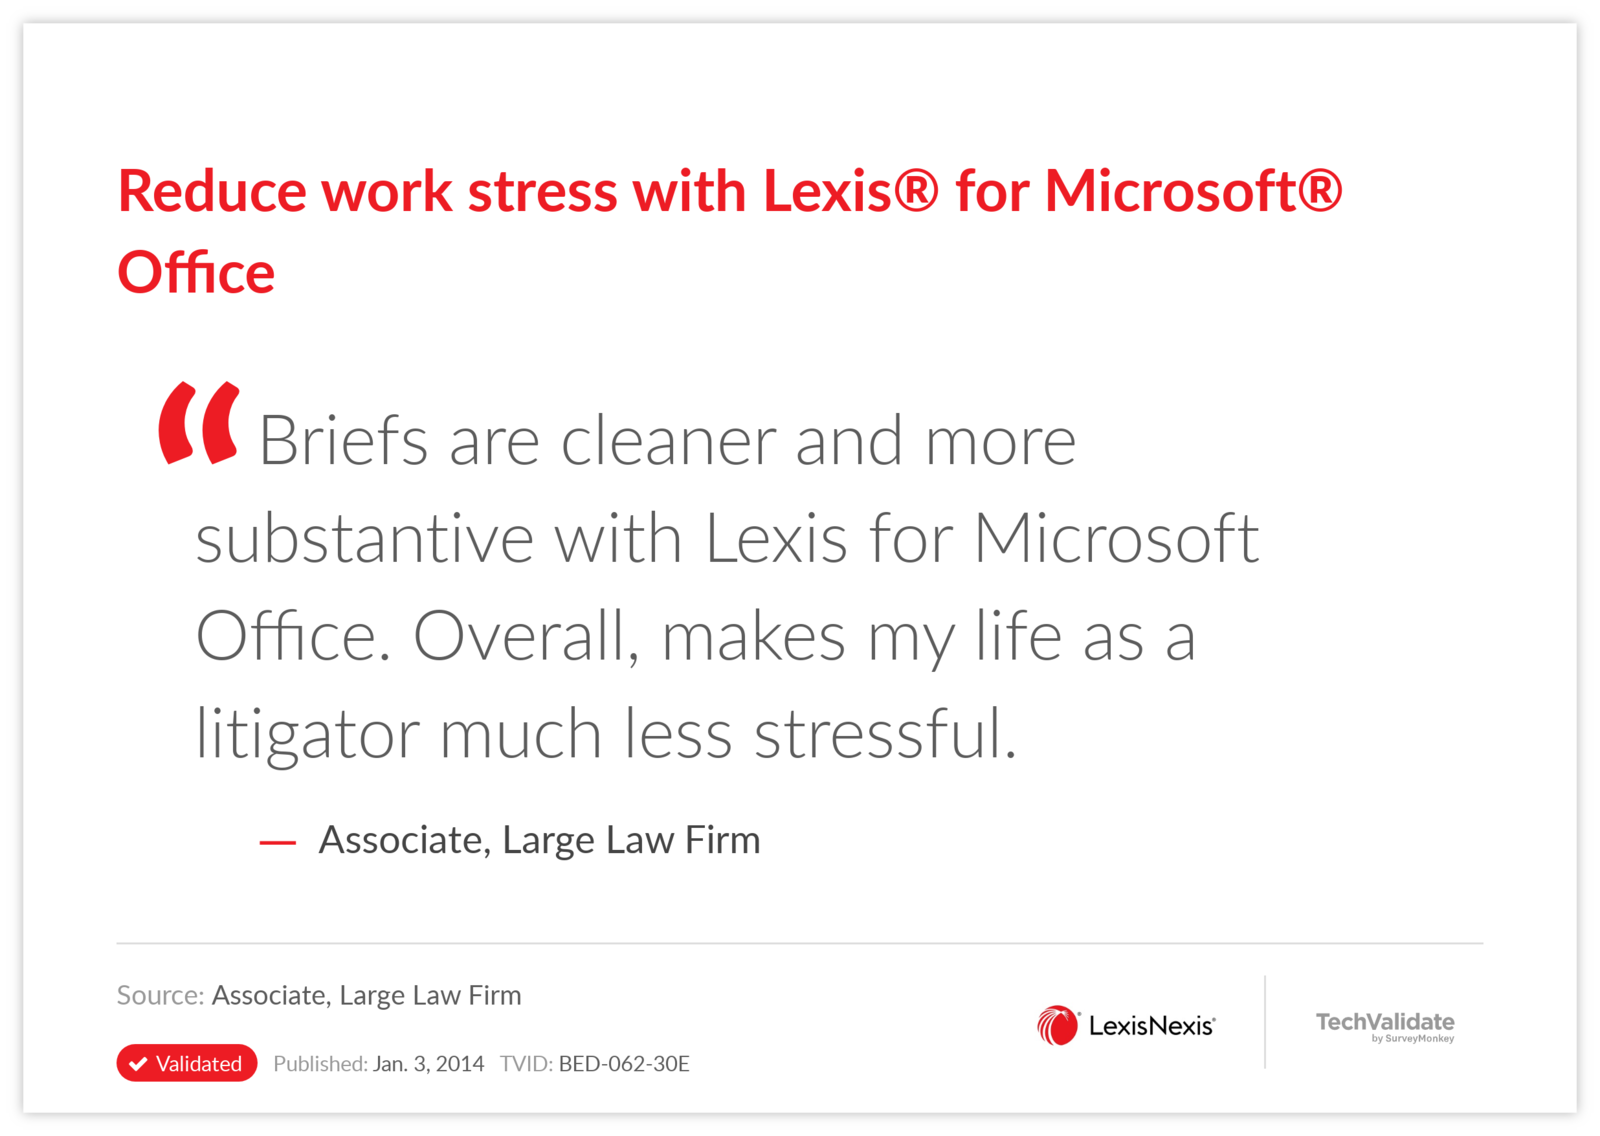 Reduce work stress with Lexis® for Microsoft® Office